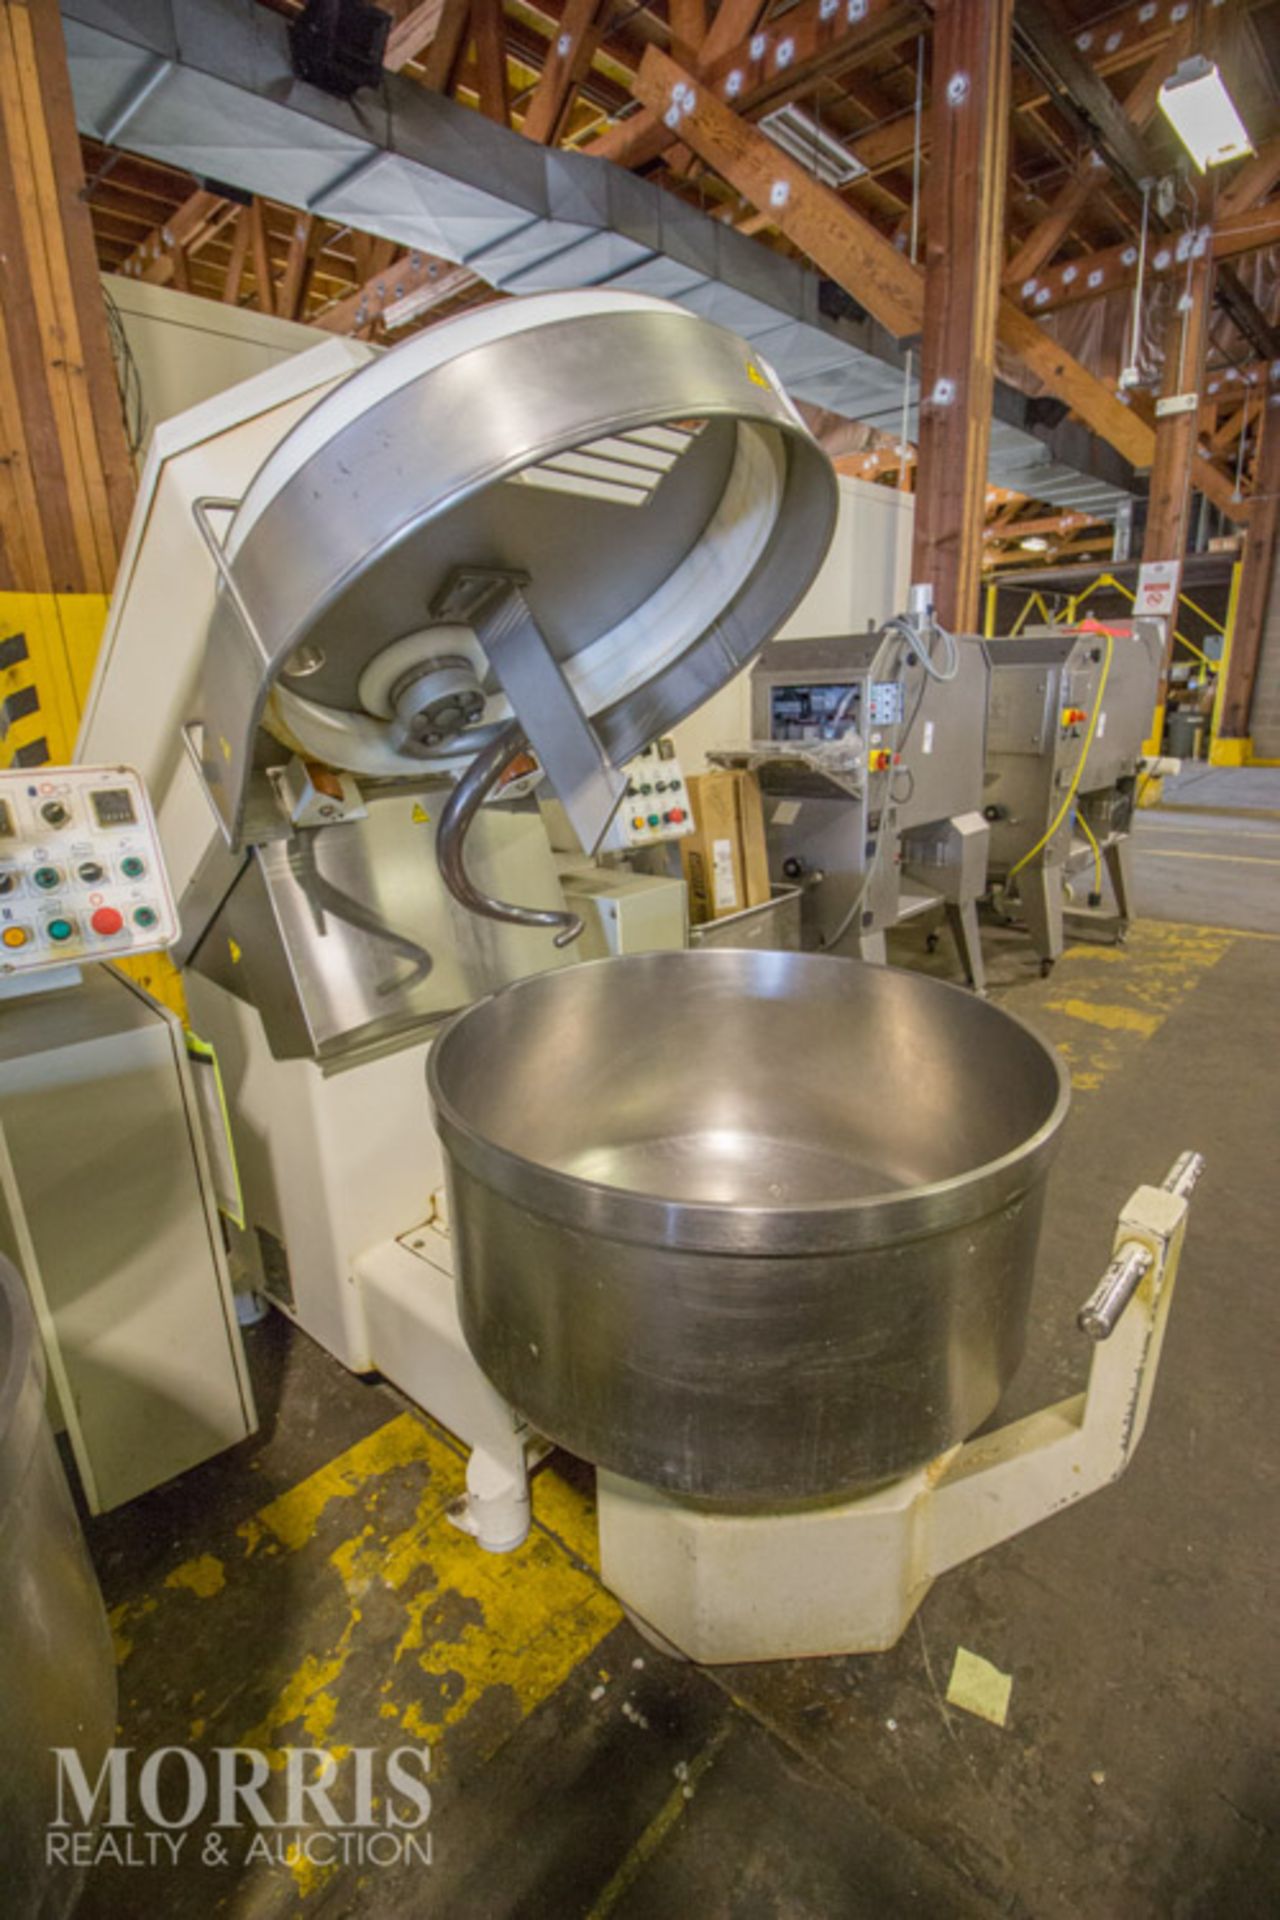 Tucs Commercial Dough Mixer with extra Bowl - Image 2 of 4